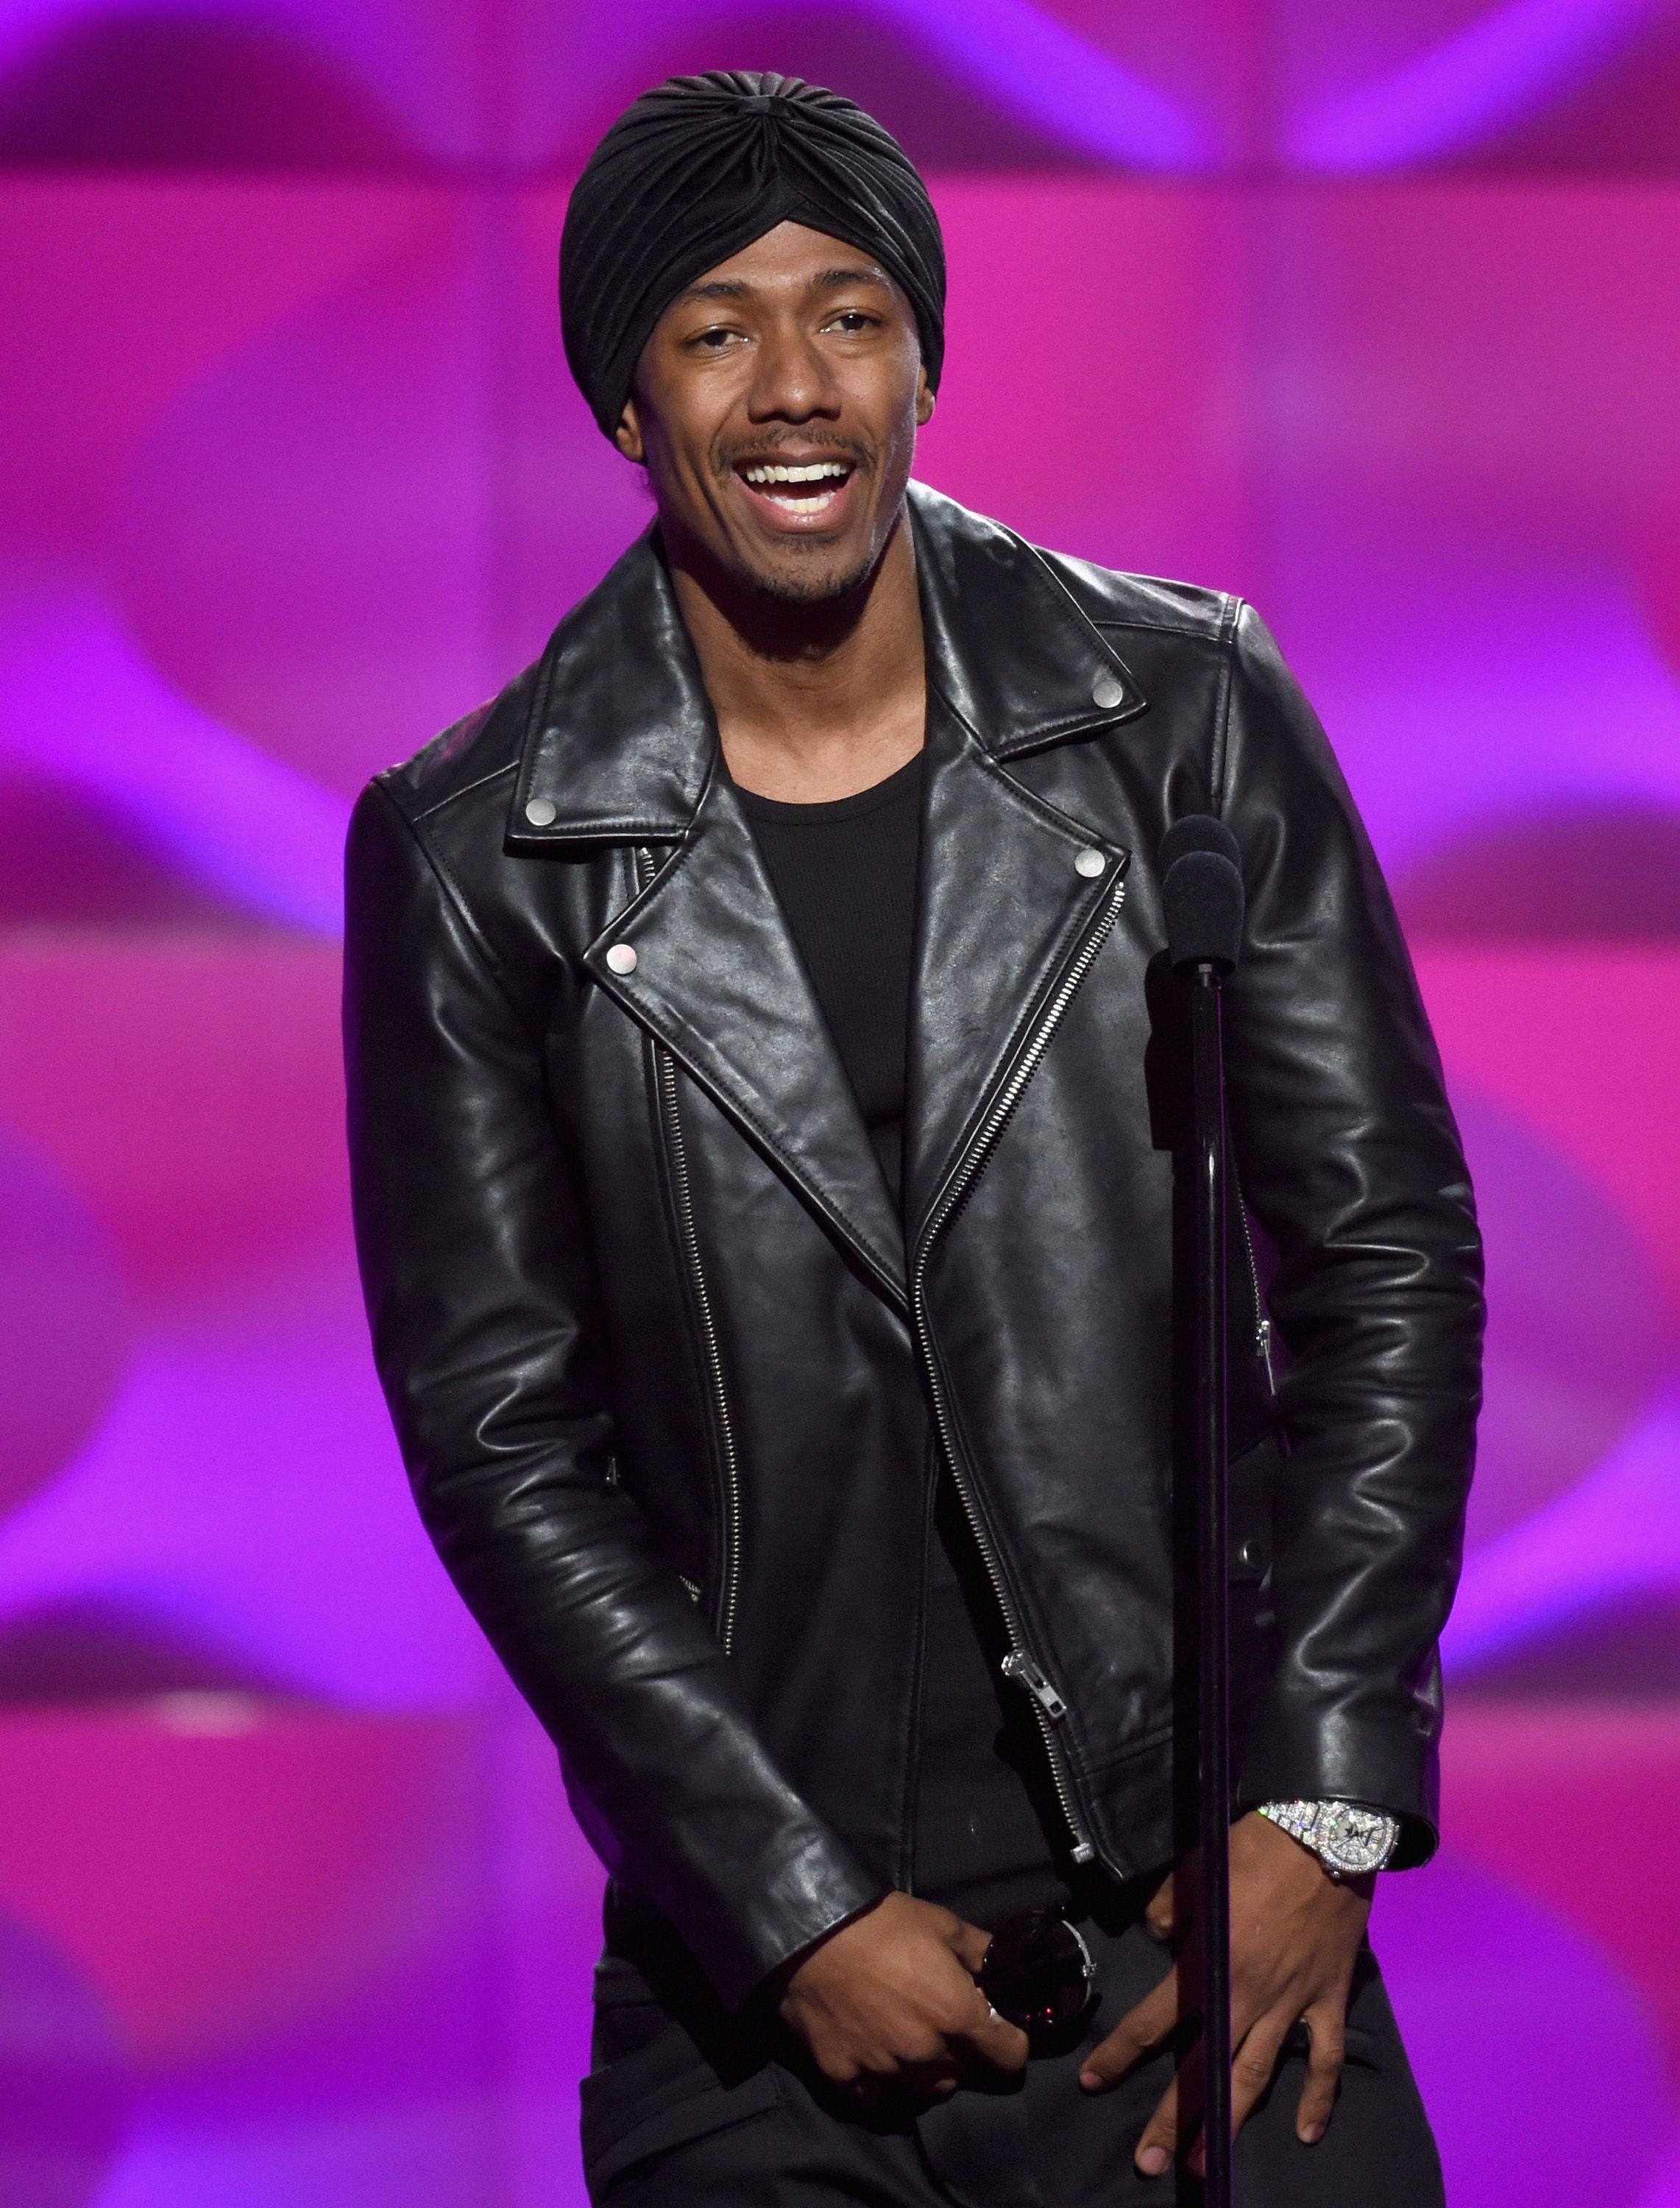 Nick Cannon spoke onstage at Billboard Women In Music 2017 at The Ray Dolby Ballroom at Hollywood & Highland Center on November 30, 2017 | Photo: Getty Images